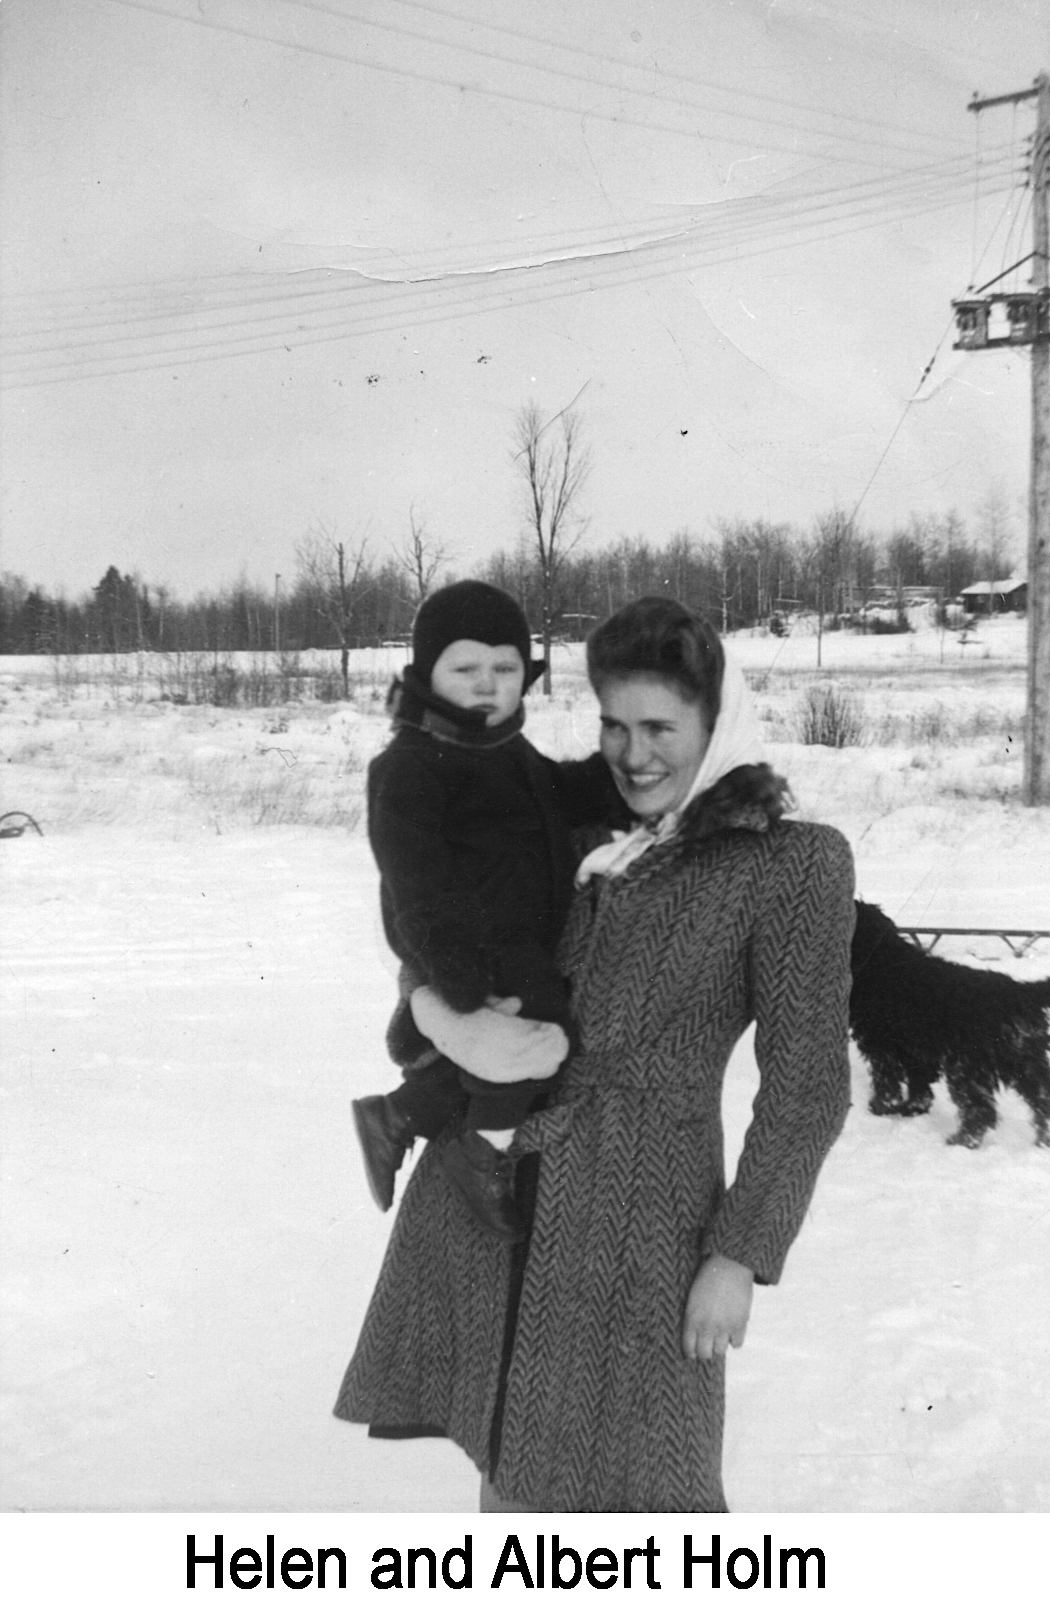 He is in a snowsuit, she's in a coat with a white scarf. There are houses and 
     trees in the far distance, and a large, furry dog behind her. 
     Electrical power lines are overhead.